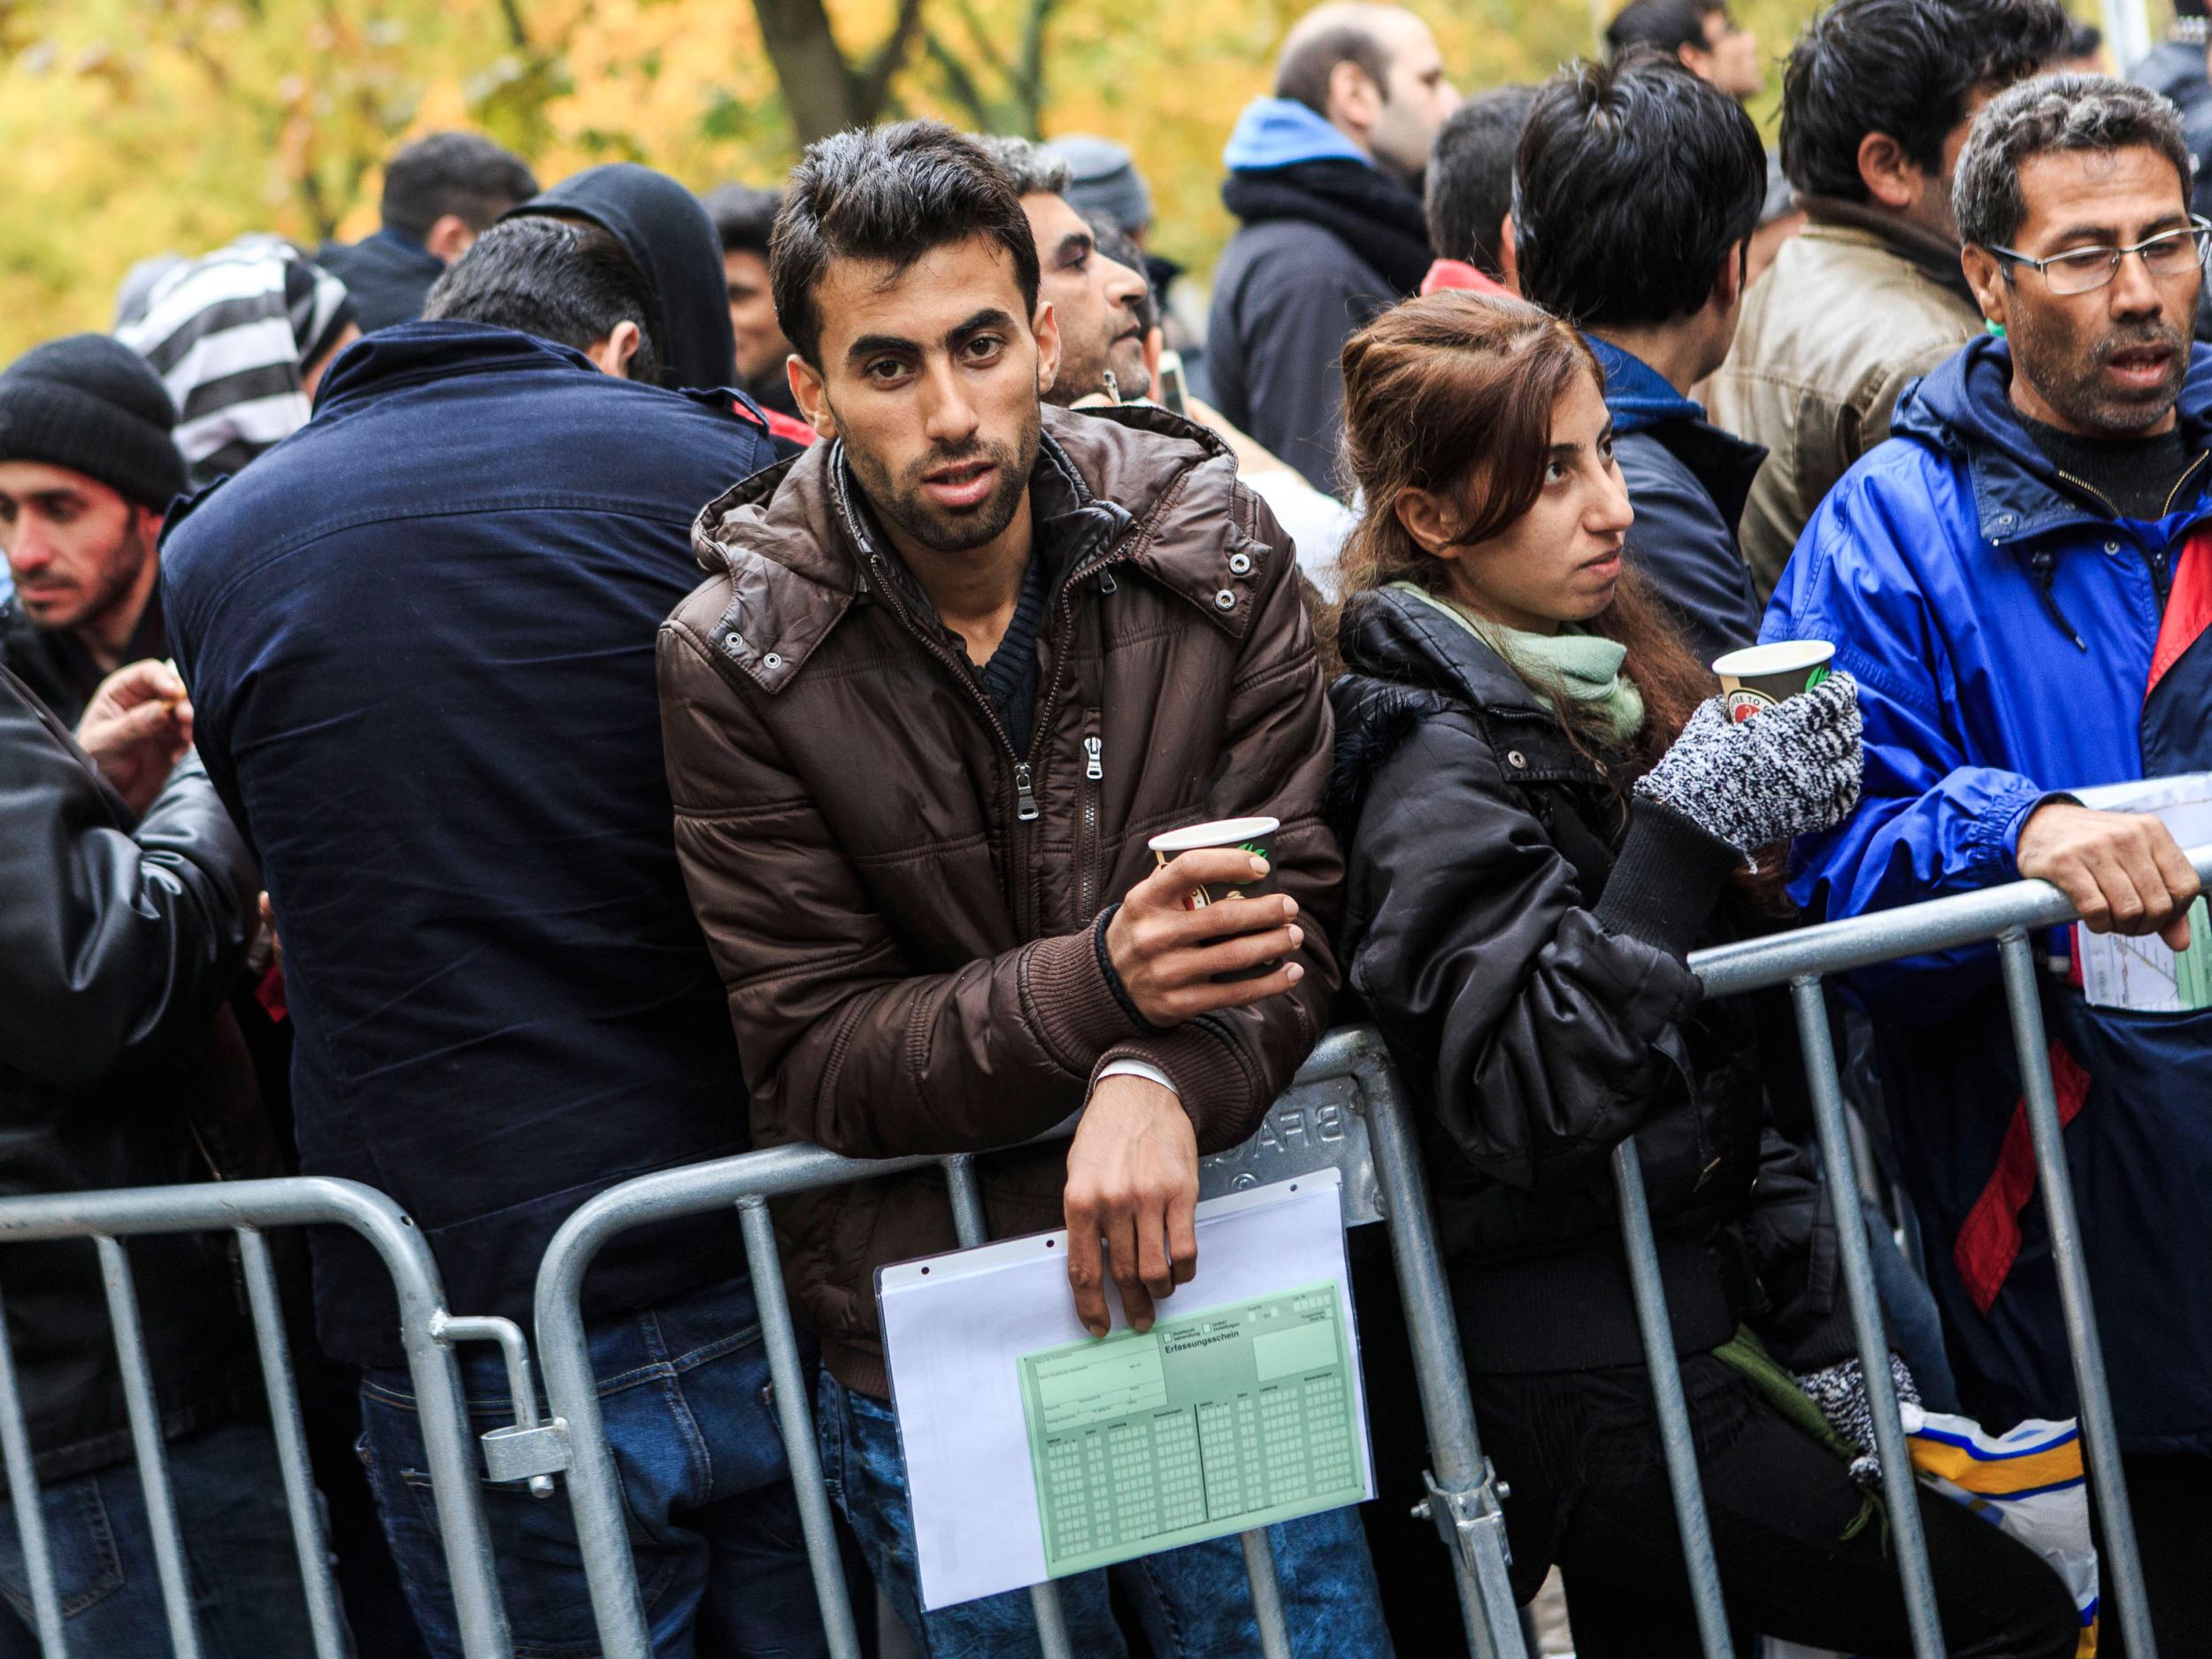 A man seeking refugee status waits to register outside the Central Registration Office for Asylum Seekers in Berlin